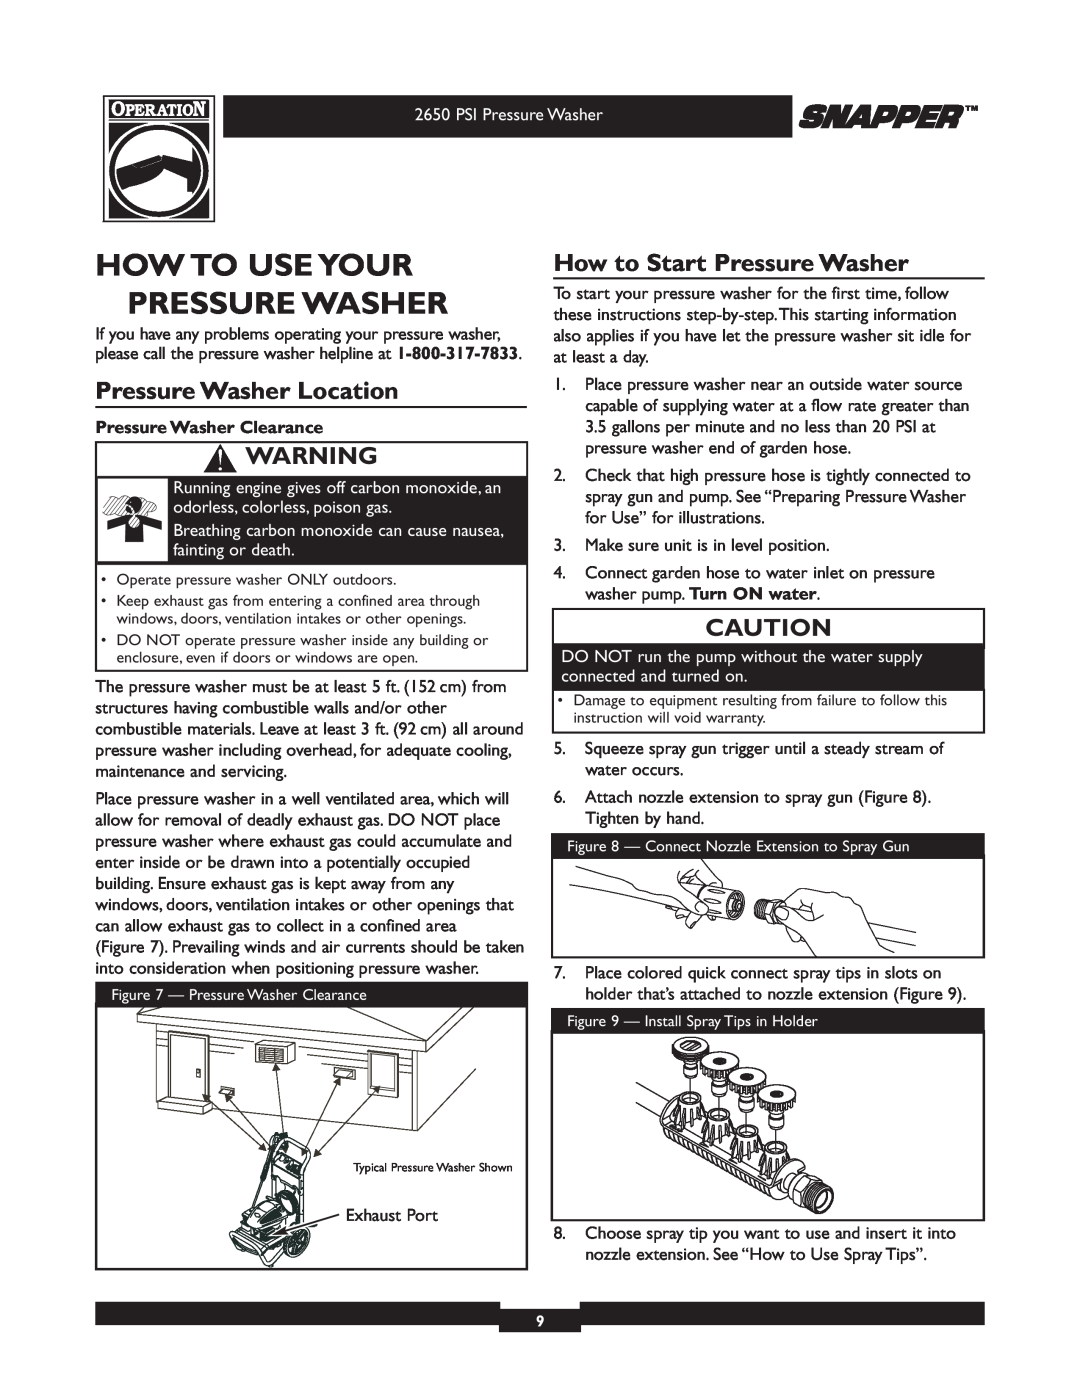 Snapper 020230 user manual How To Use Your Pressure Washer, Pressure Washer Location, How to Start Pressure Washer 